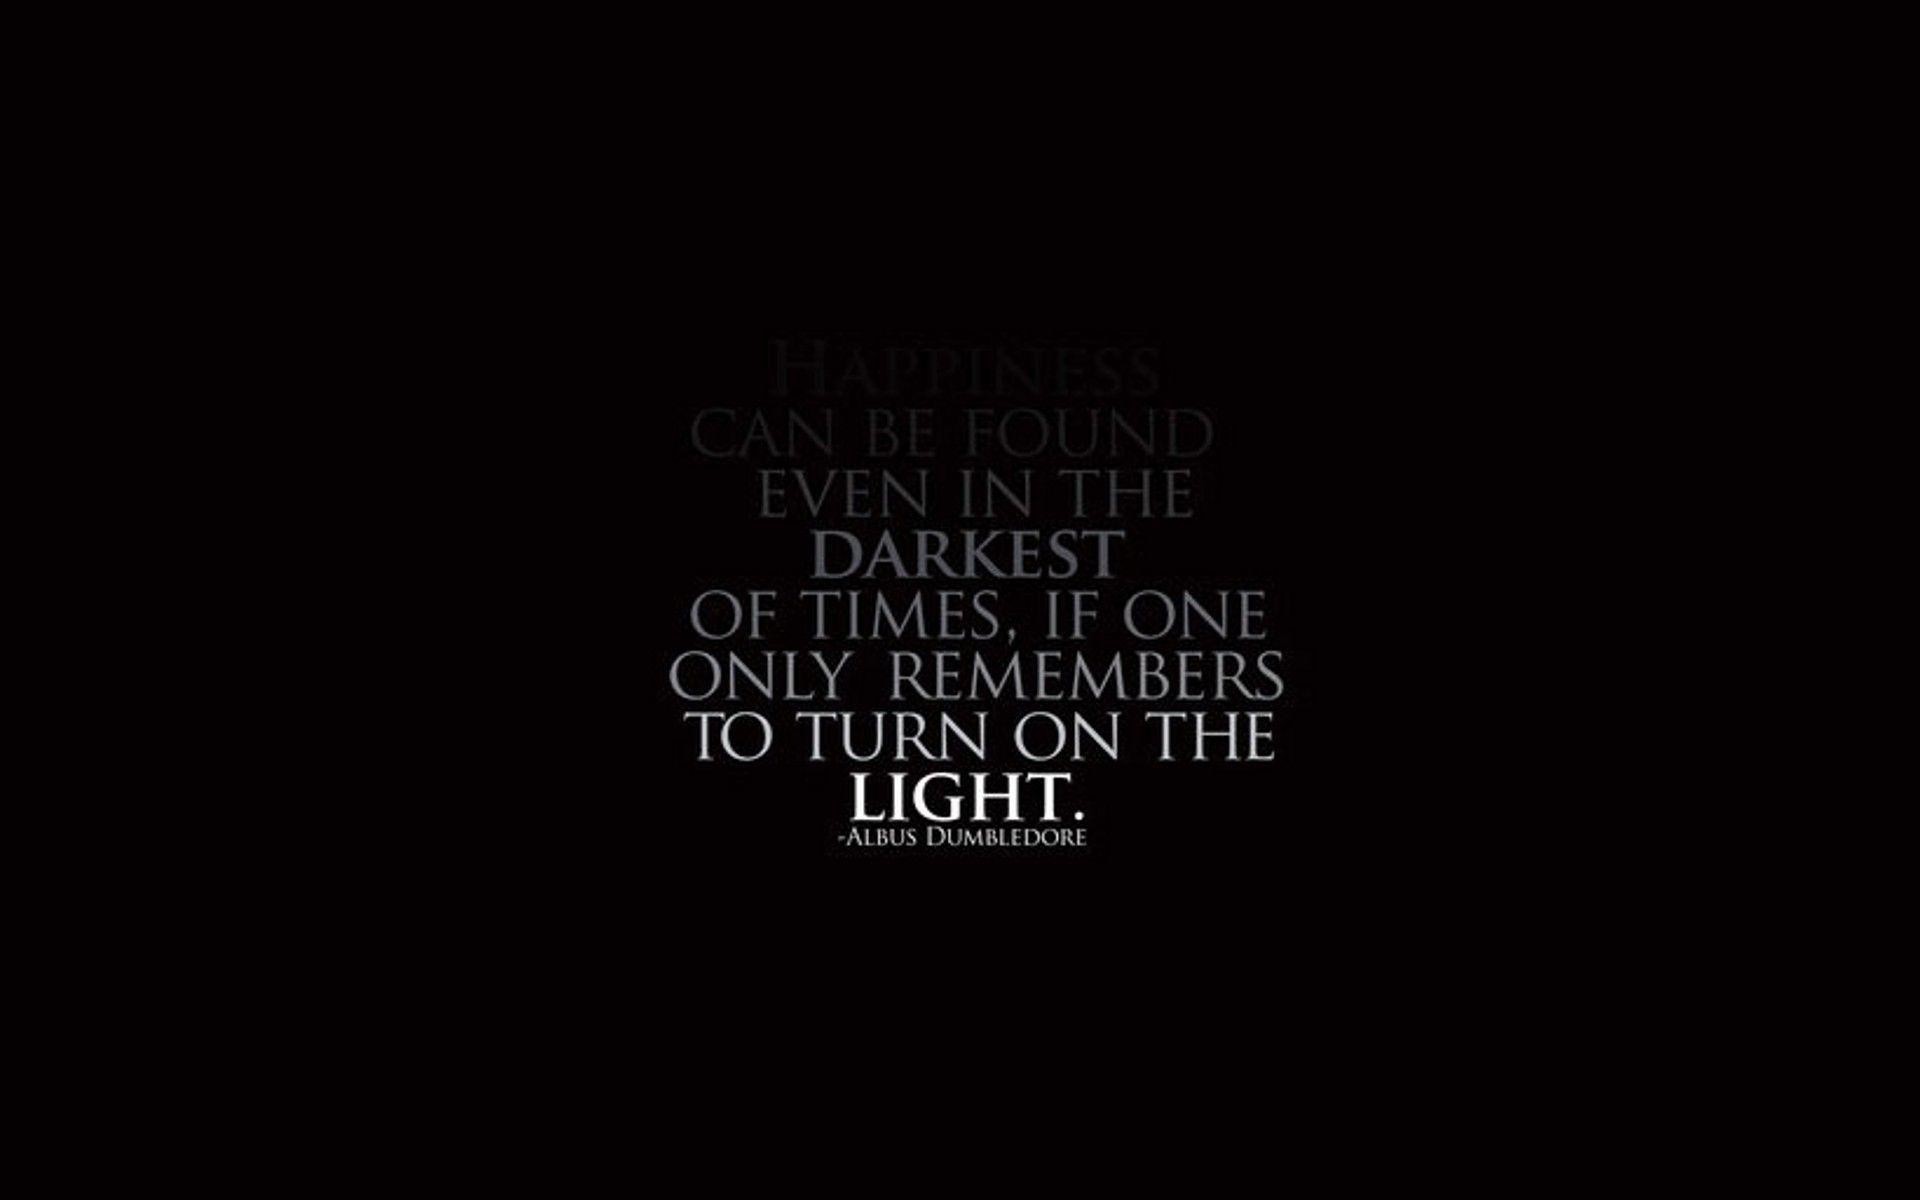 Harry Potter Wallpapers With Quotes - Darkest Of Times If One - HD Wallpaper 